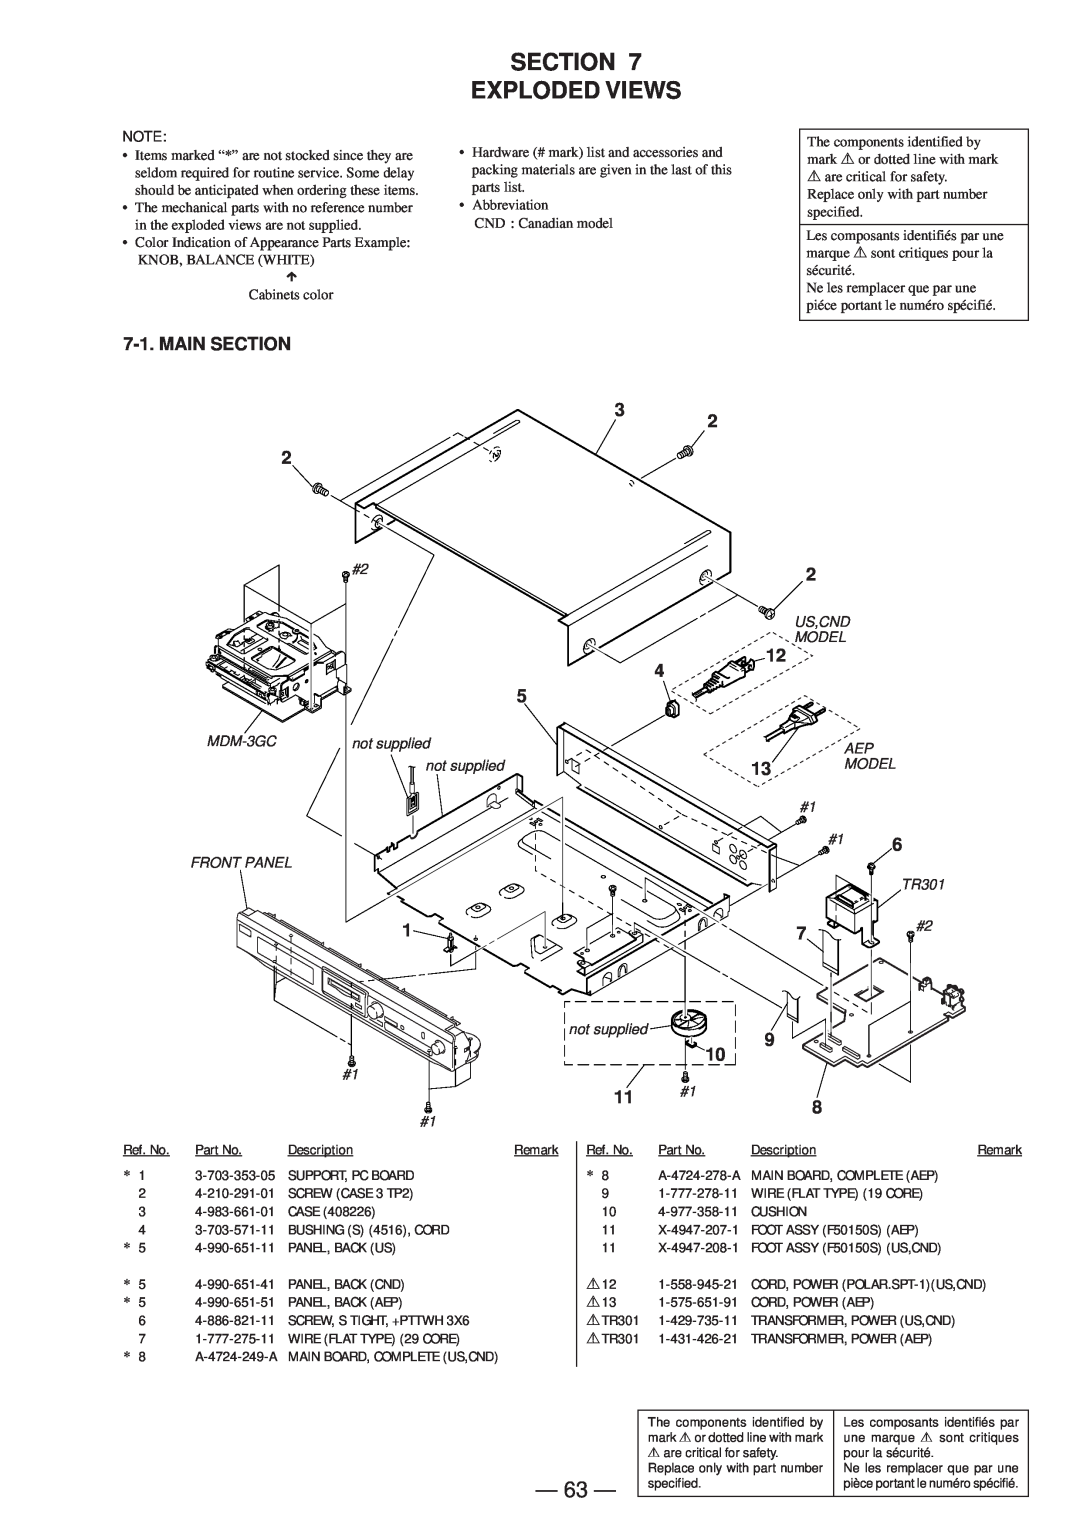 Sony MDS-JD320 service manual Section Exploded Views, Main Section 